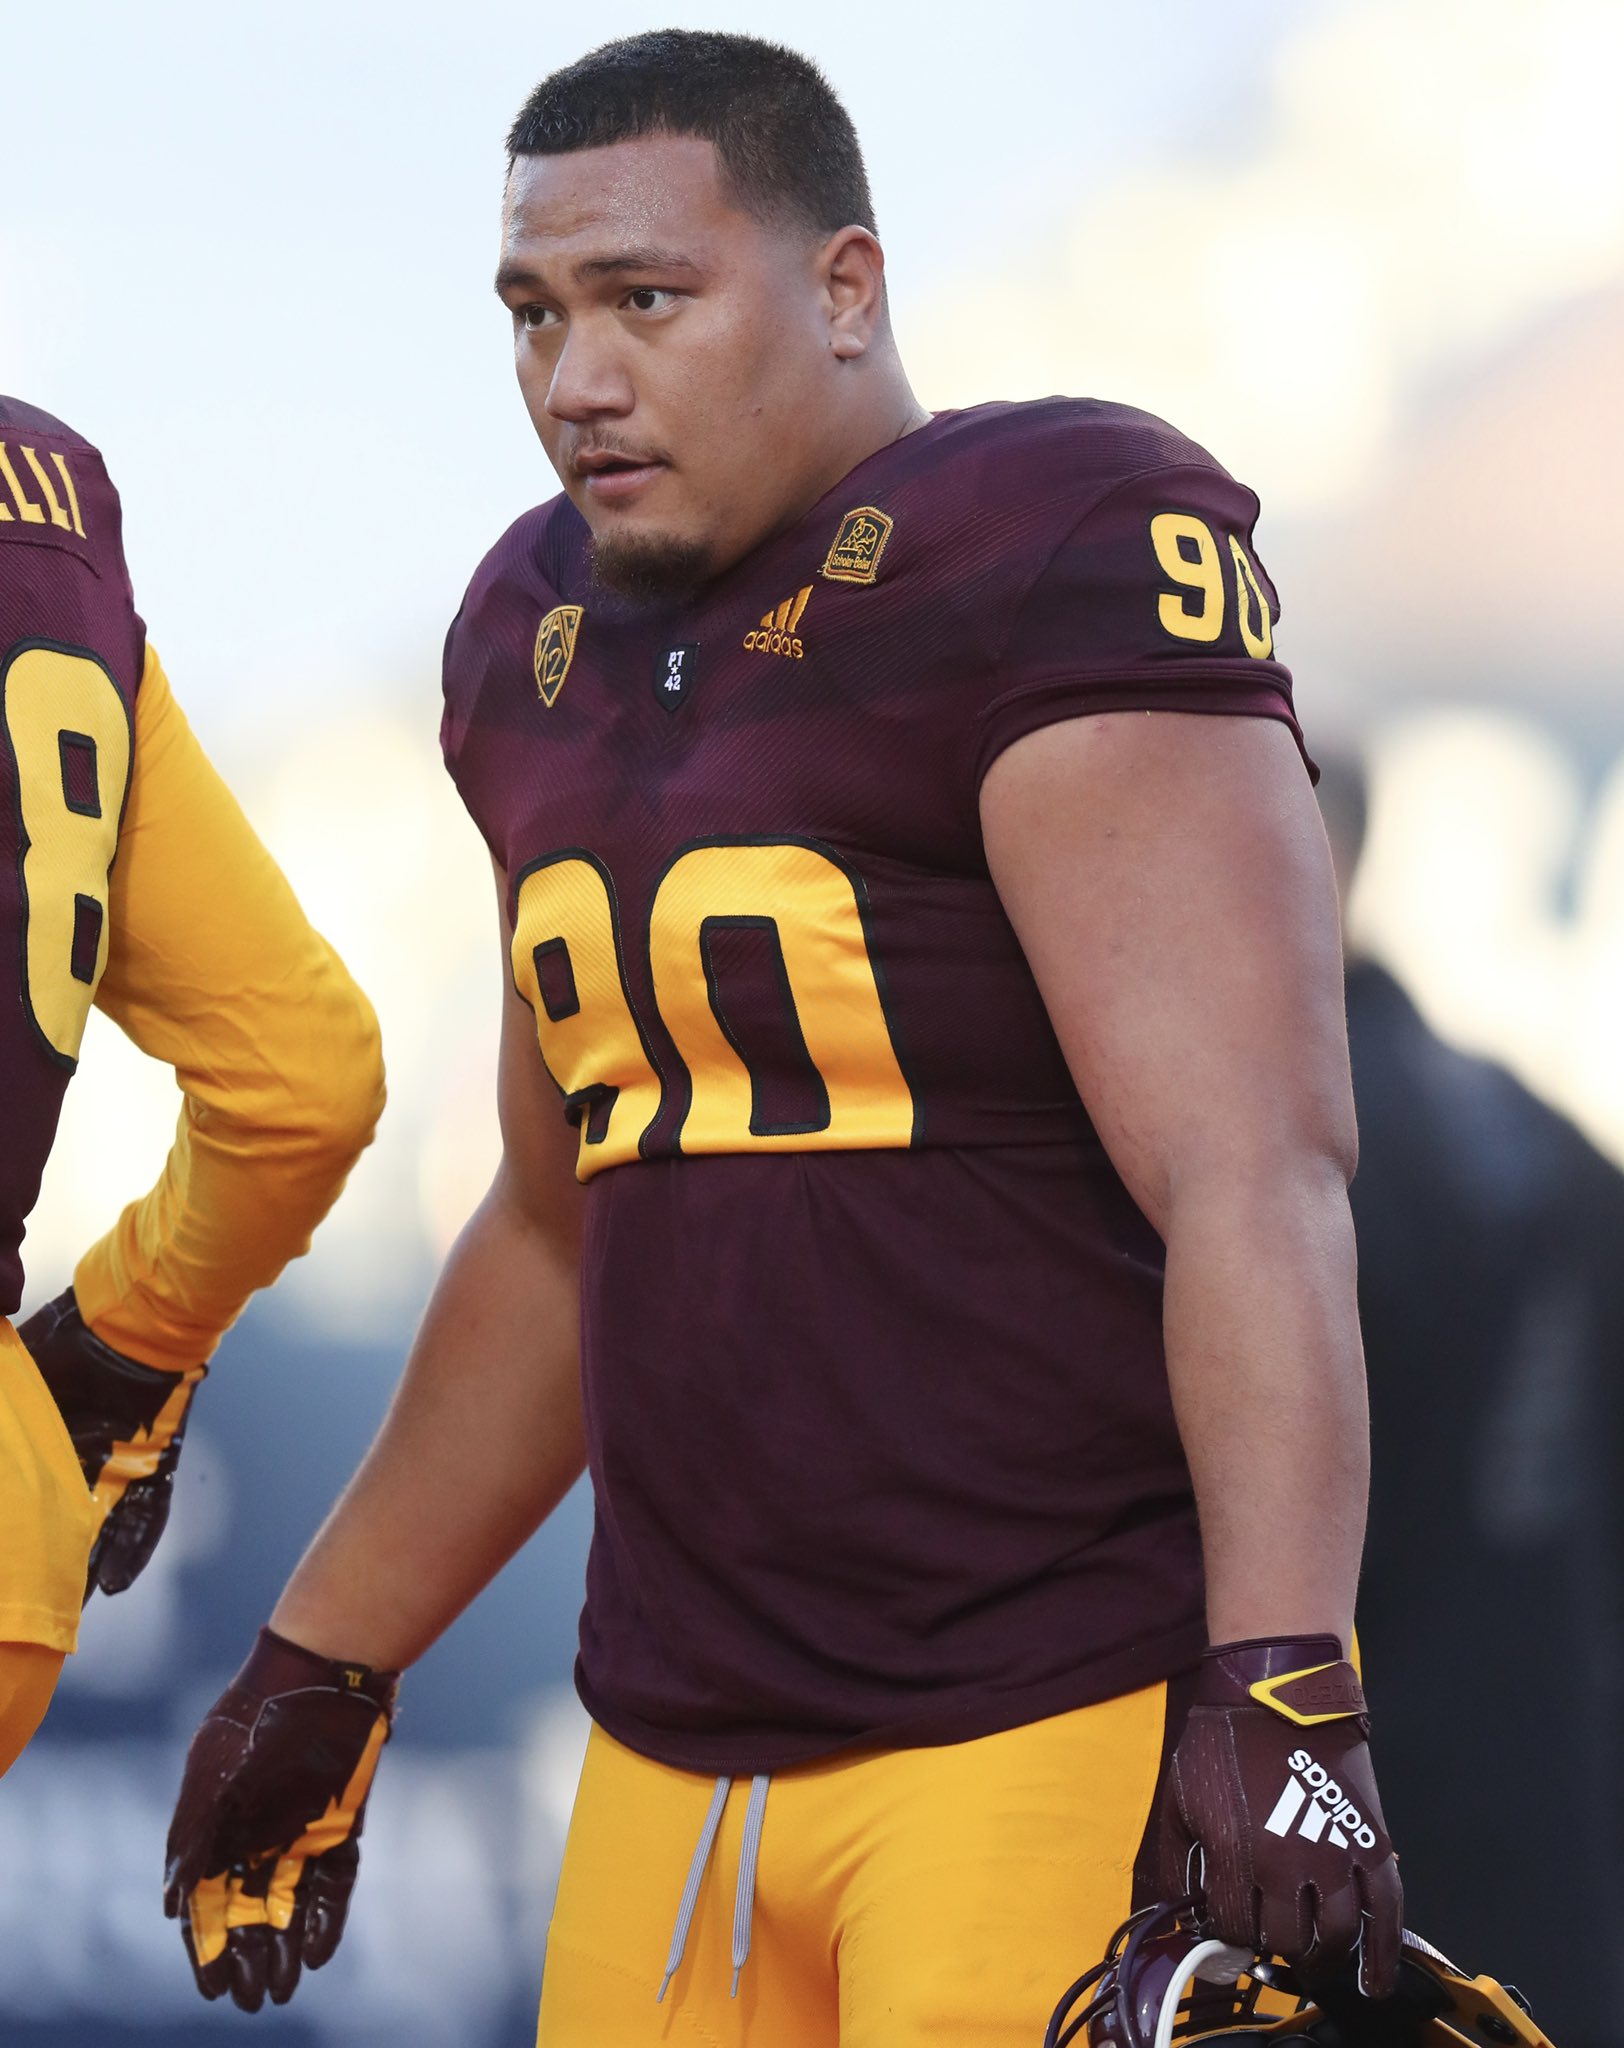 PFF College on X: "BREAKING: Arizona State star DT Jermayne Lole plans to  enter transfer portal to explore NIL opportunities, but he hopes to remain  a Sun Devil, per @247Sports. https://t.co/uPC0rOYl5j" /